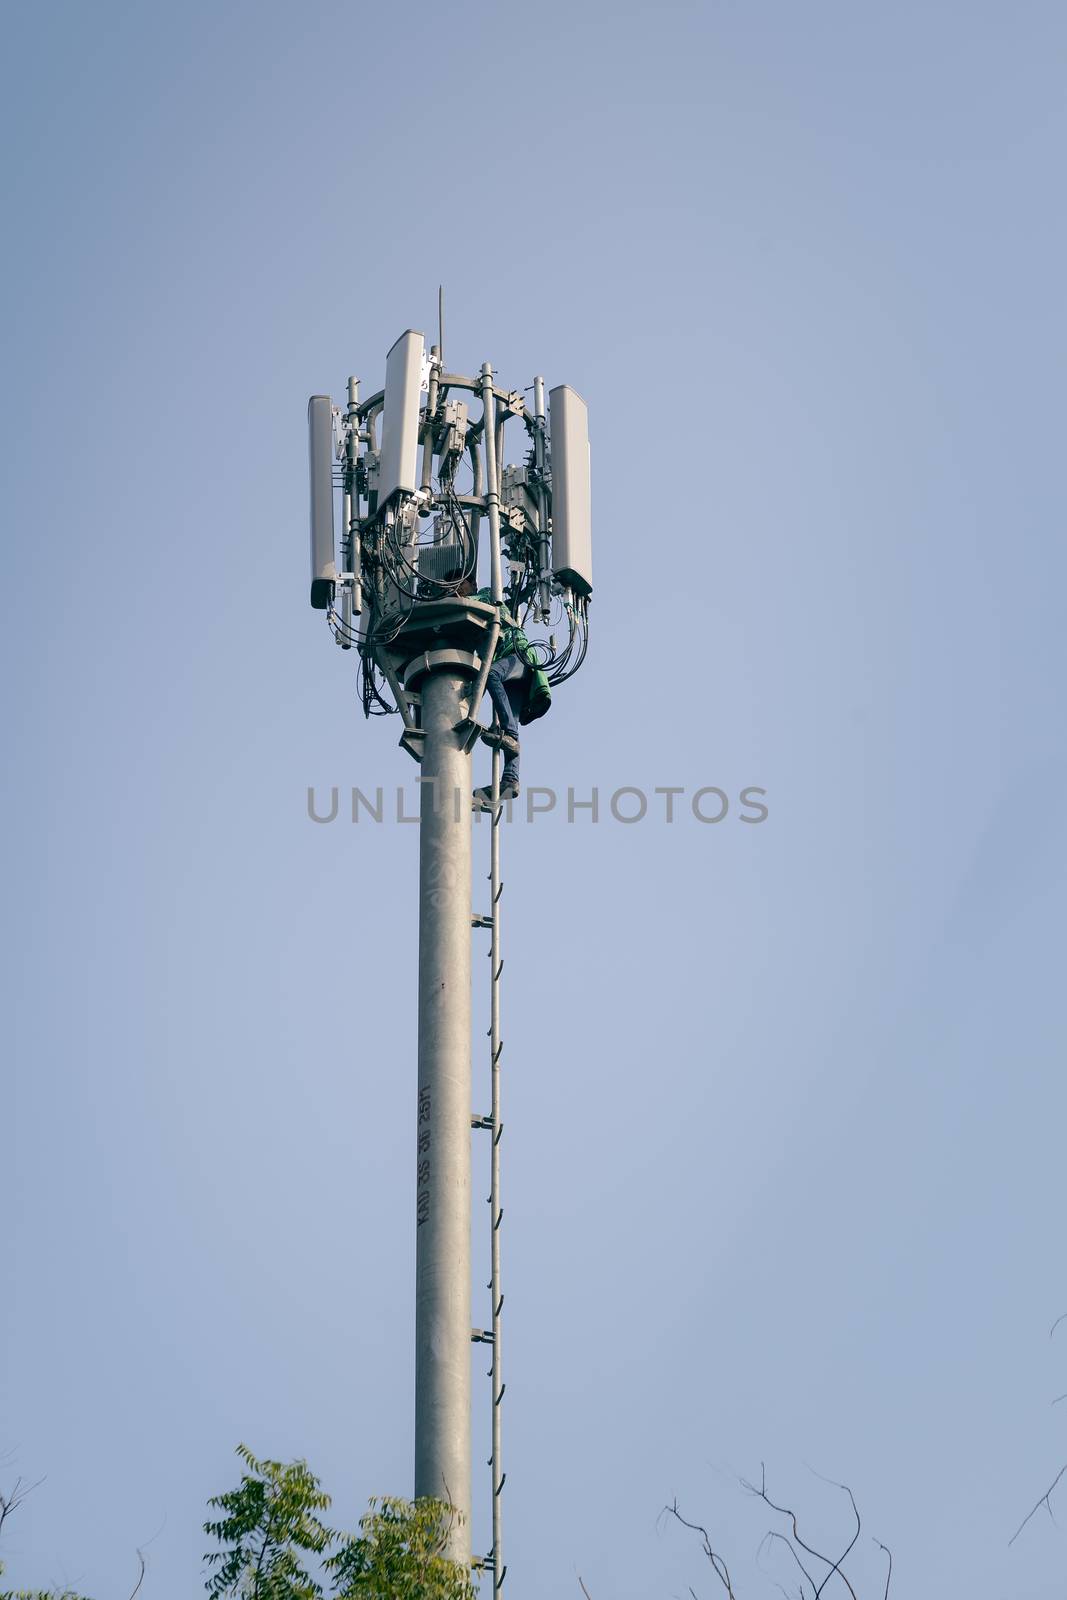 An Indian man working on Telecommunication tower. Dec 13, 2015. Kanpur, India.